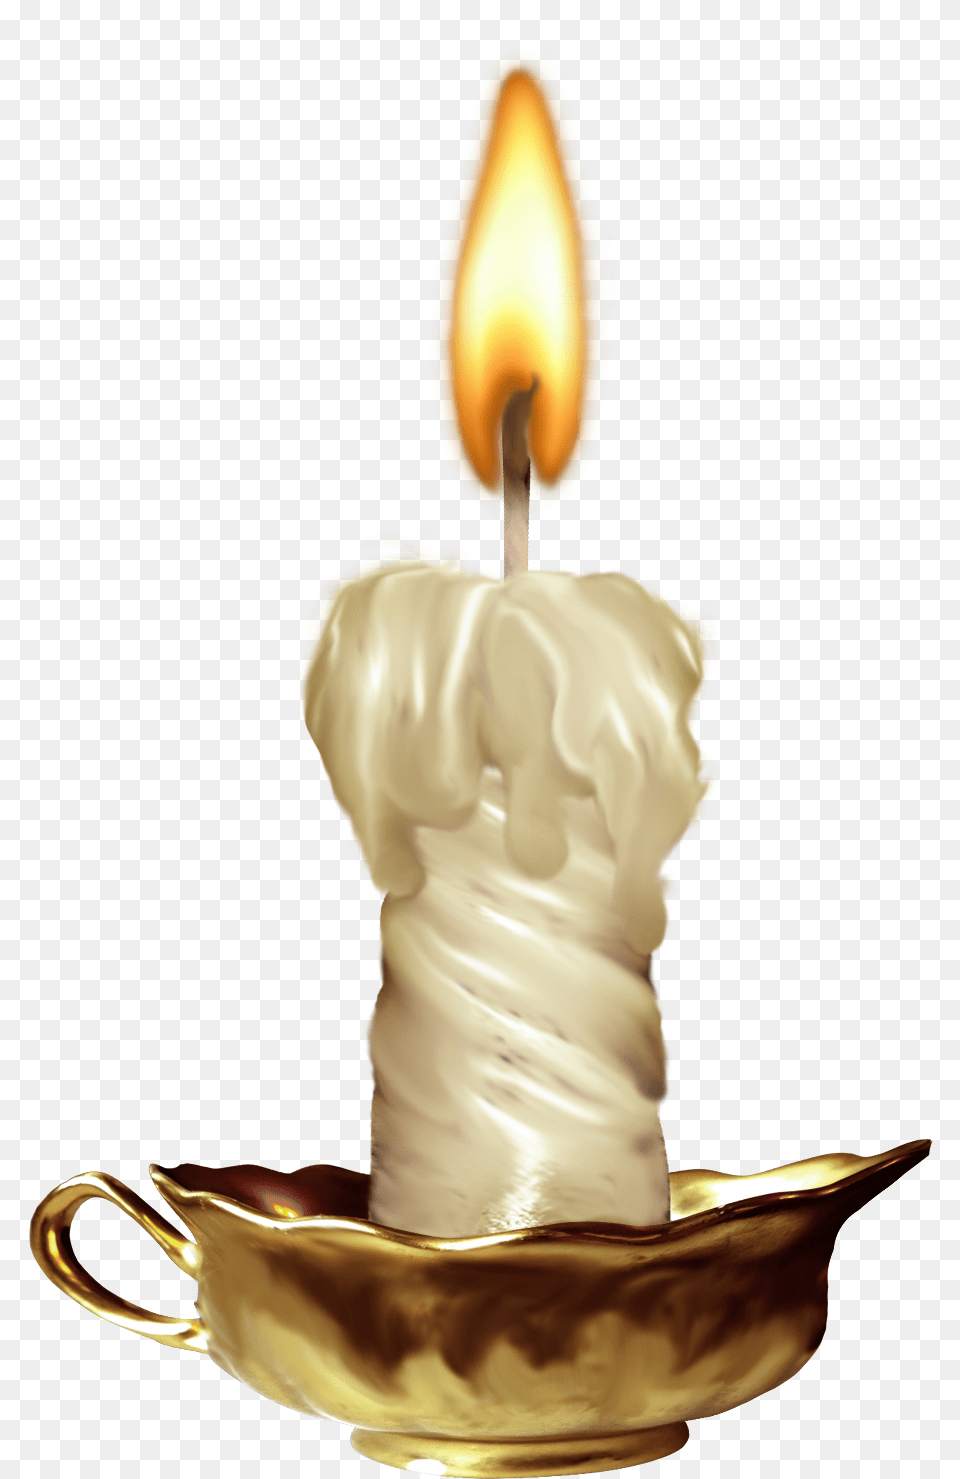 Candle Flame Candle Light, Cream, Dessert, Food, Fire Free Png Download